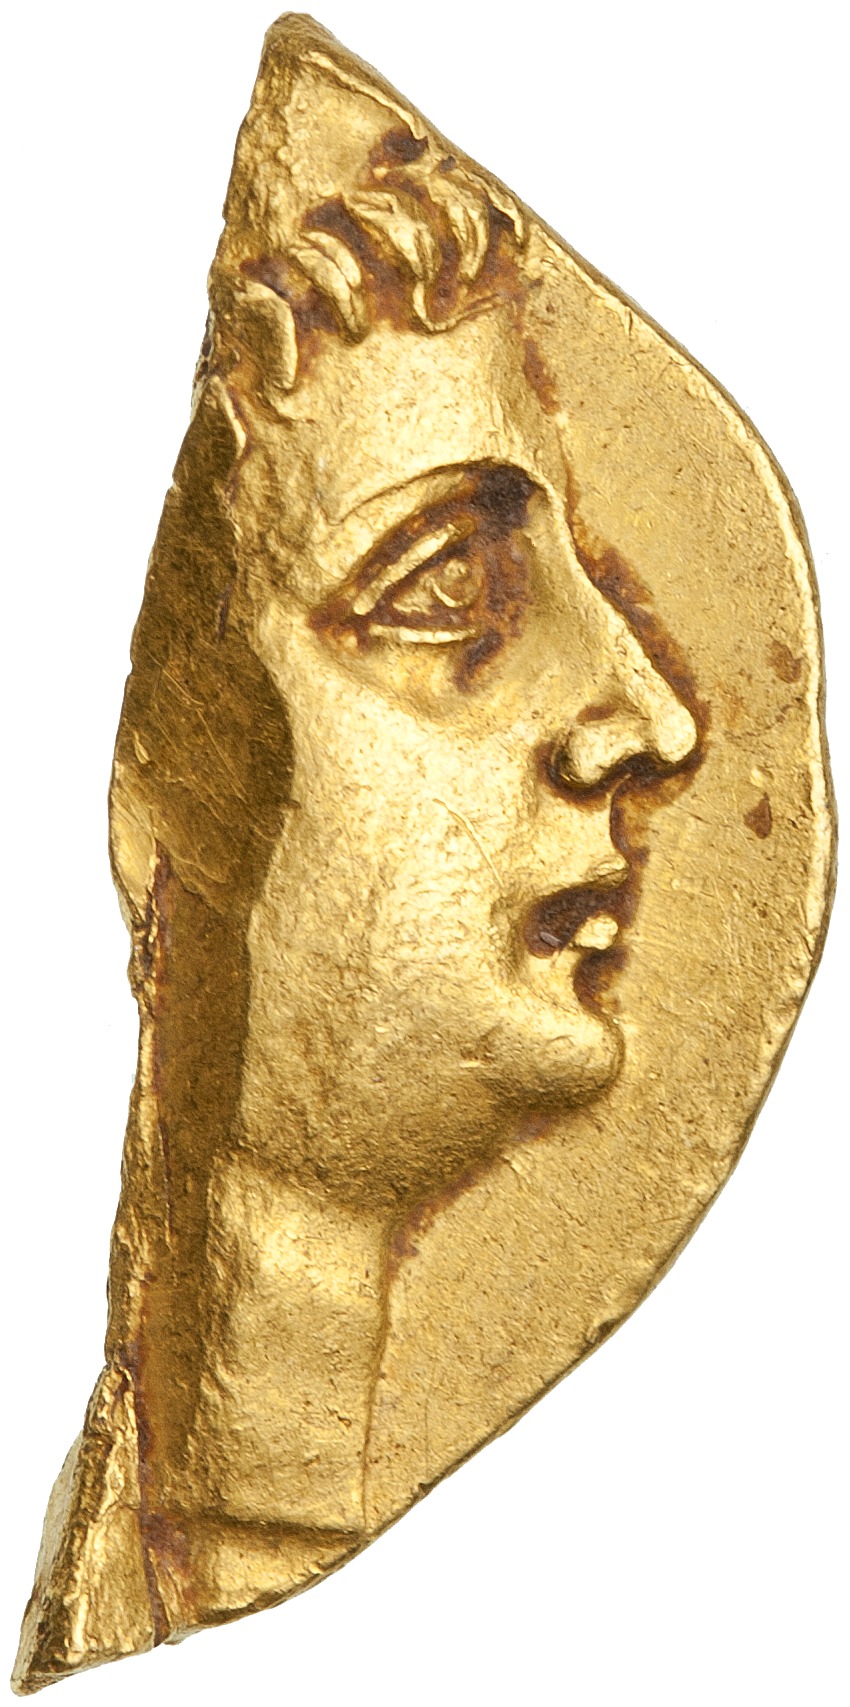 Hiding in Plain Sight: New Seleucid Discoveries at the ANS